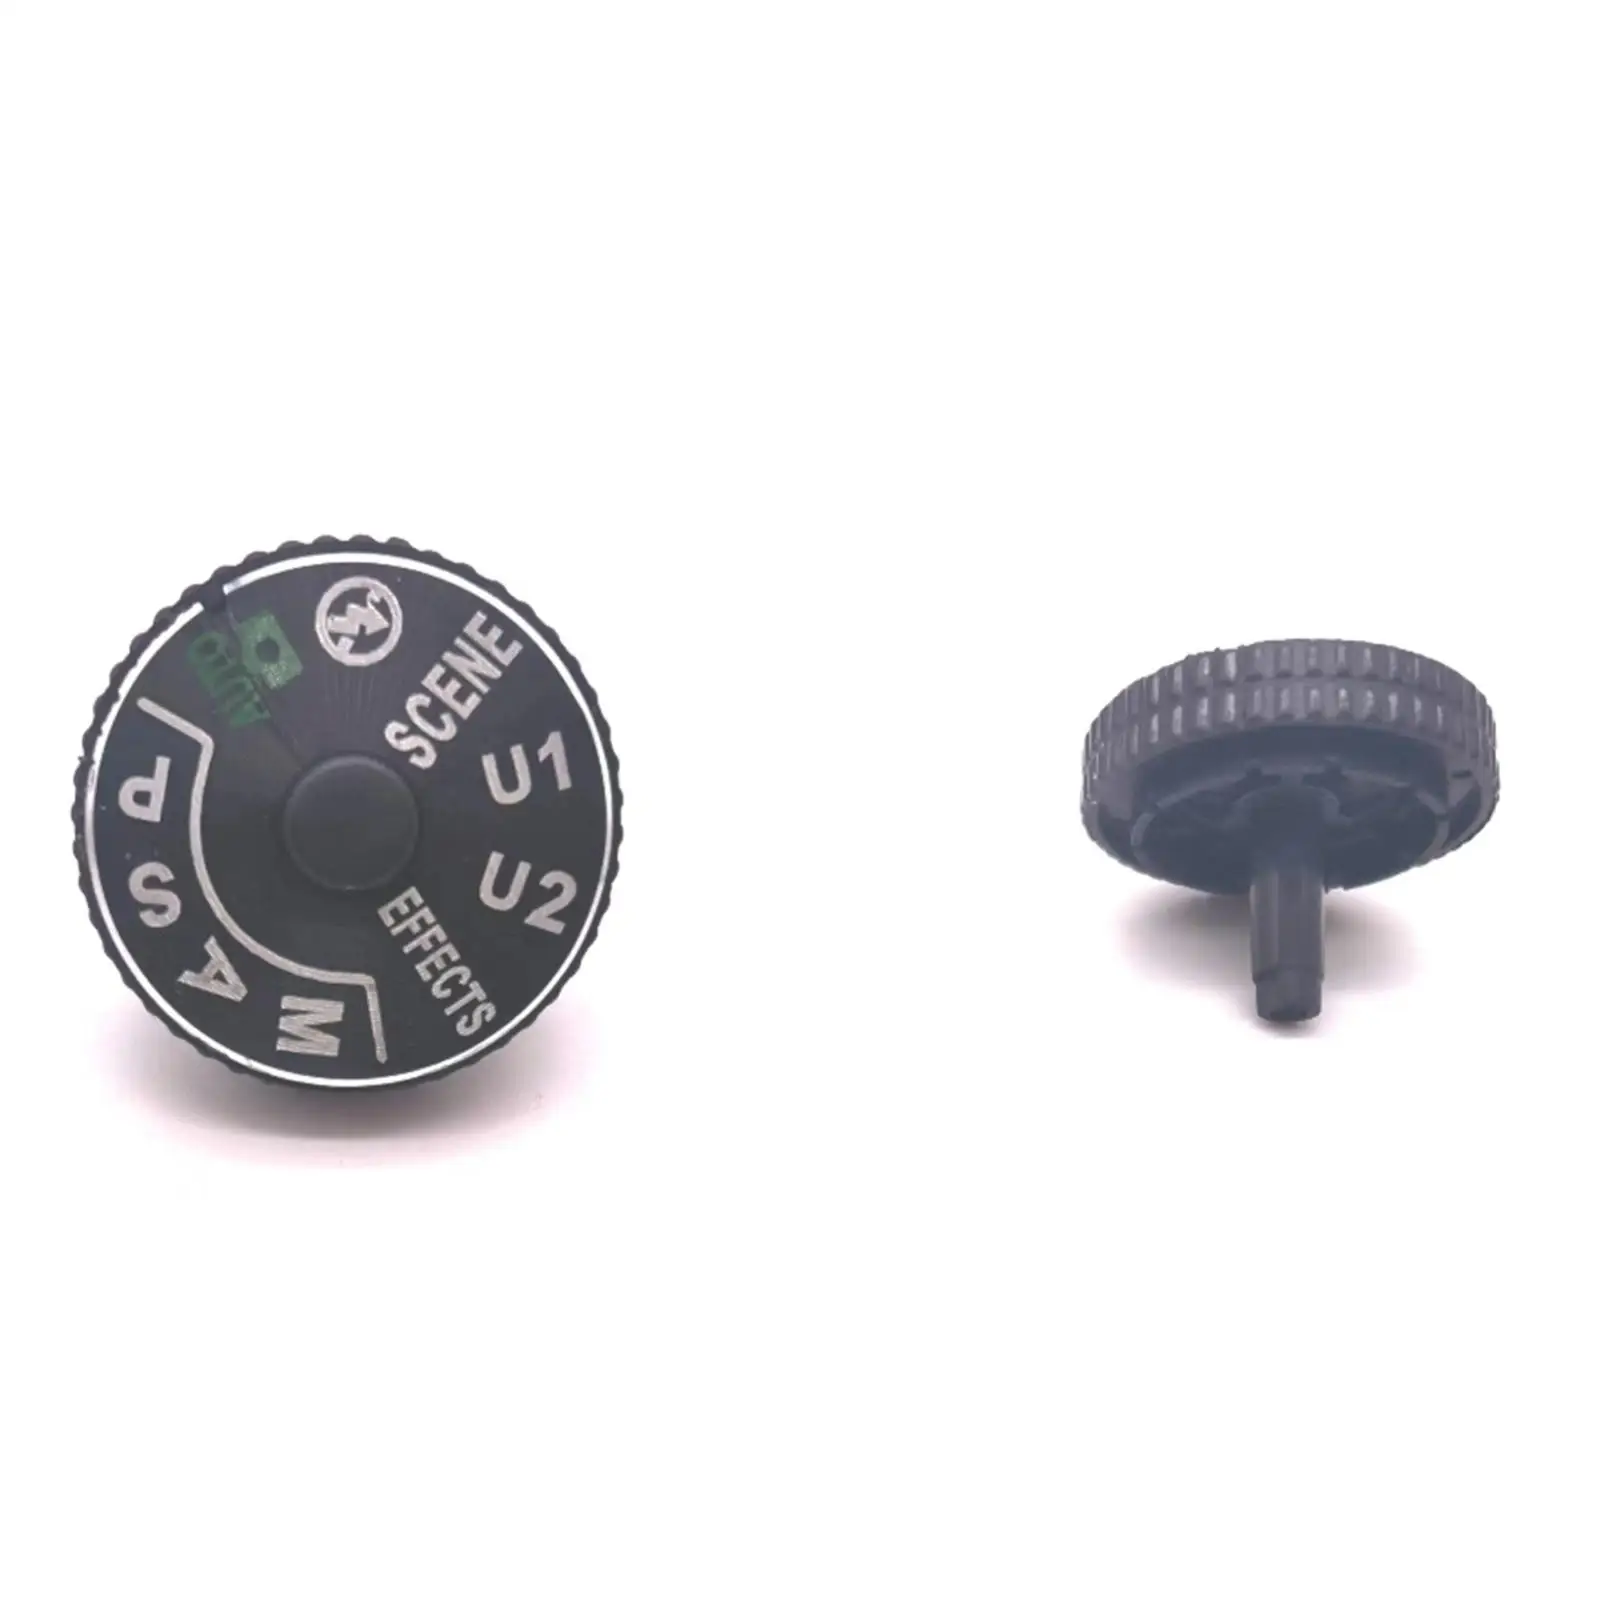 Camera Top Mode Dial Cover Replacement Spare Parts High Performance Function Plate Interface Cap for D7100 D7200 Camera